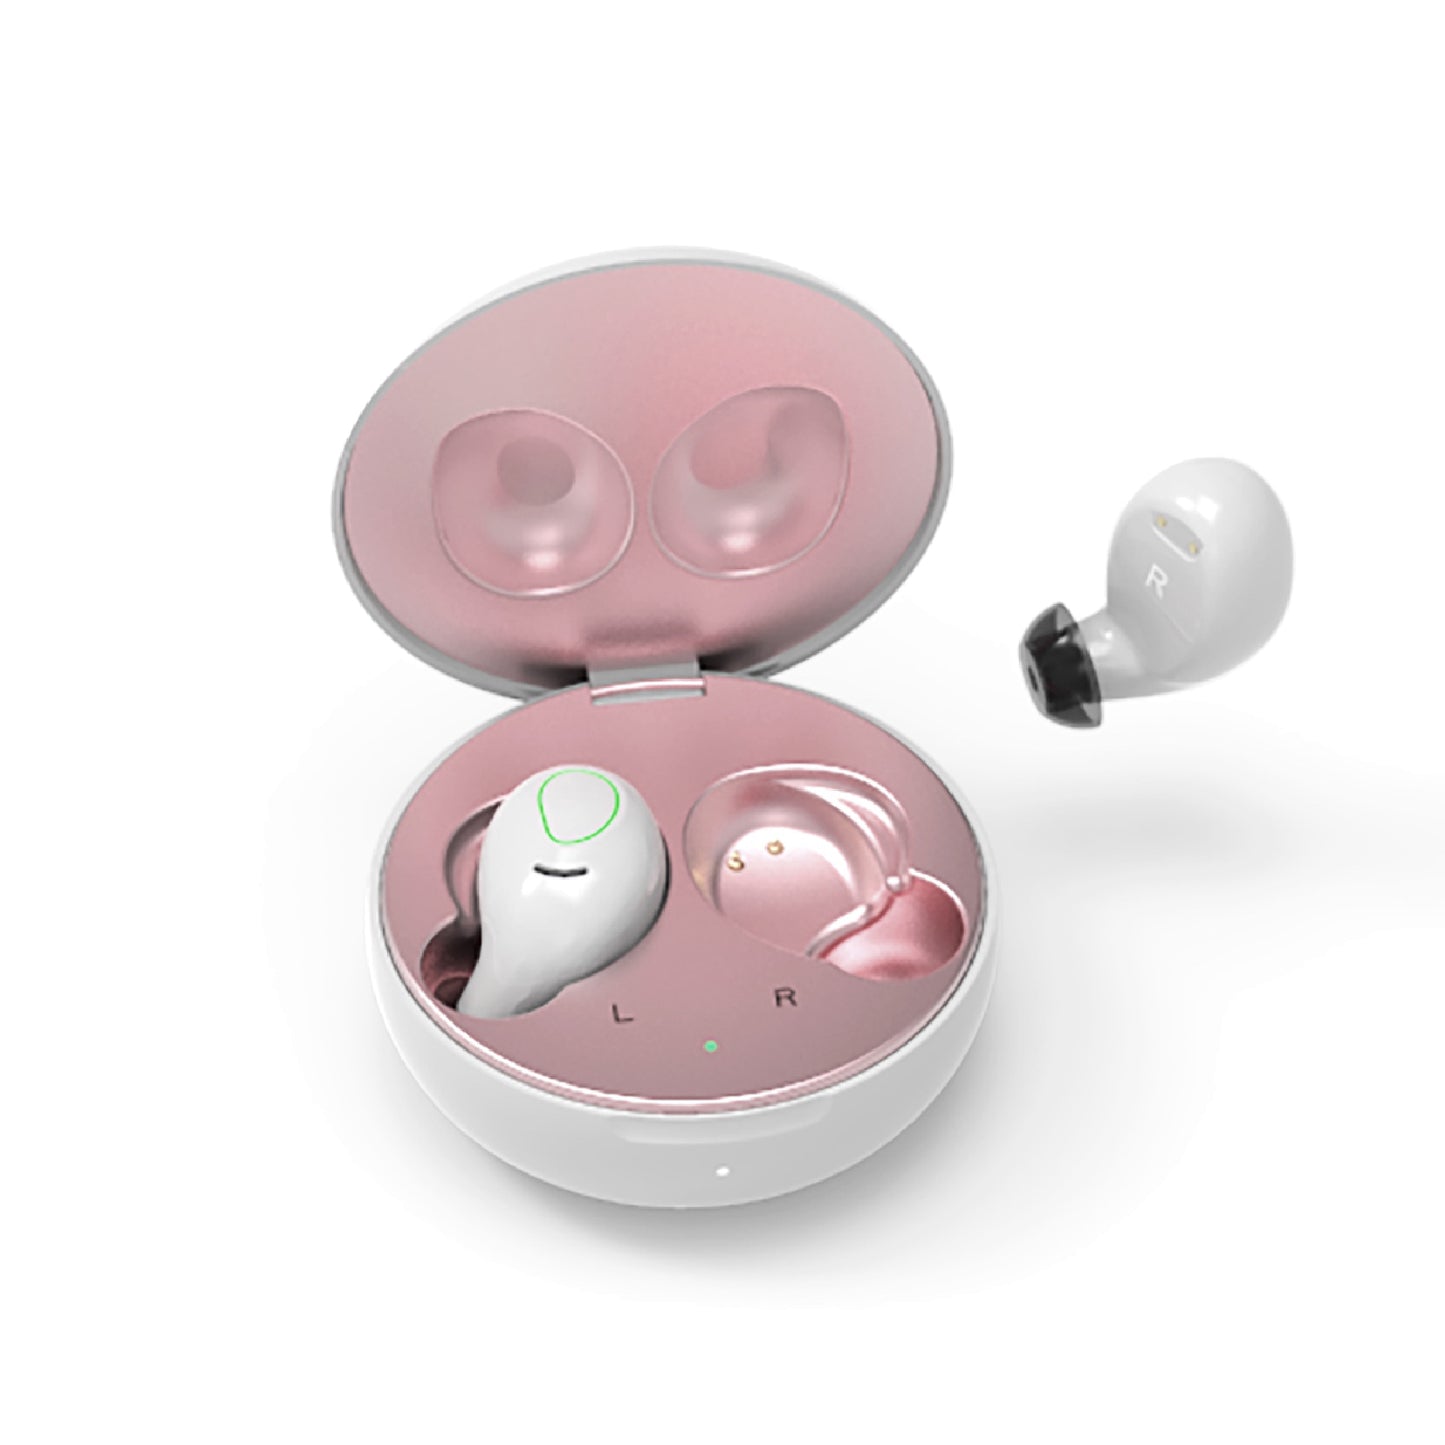 AIR ZEN 2.0 Pearl White + ChargePad, In Ear Headphones, Friendie Audio Pty Ltd, Friendie Audio Pty Ltd